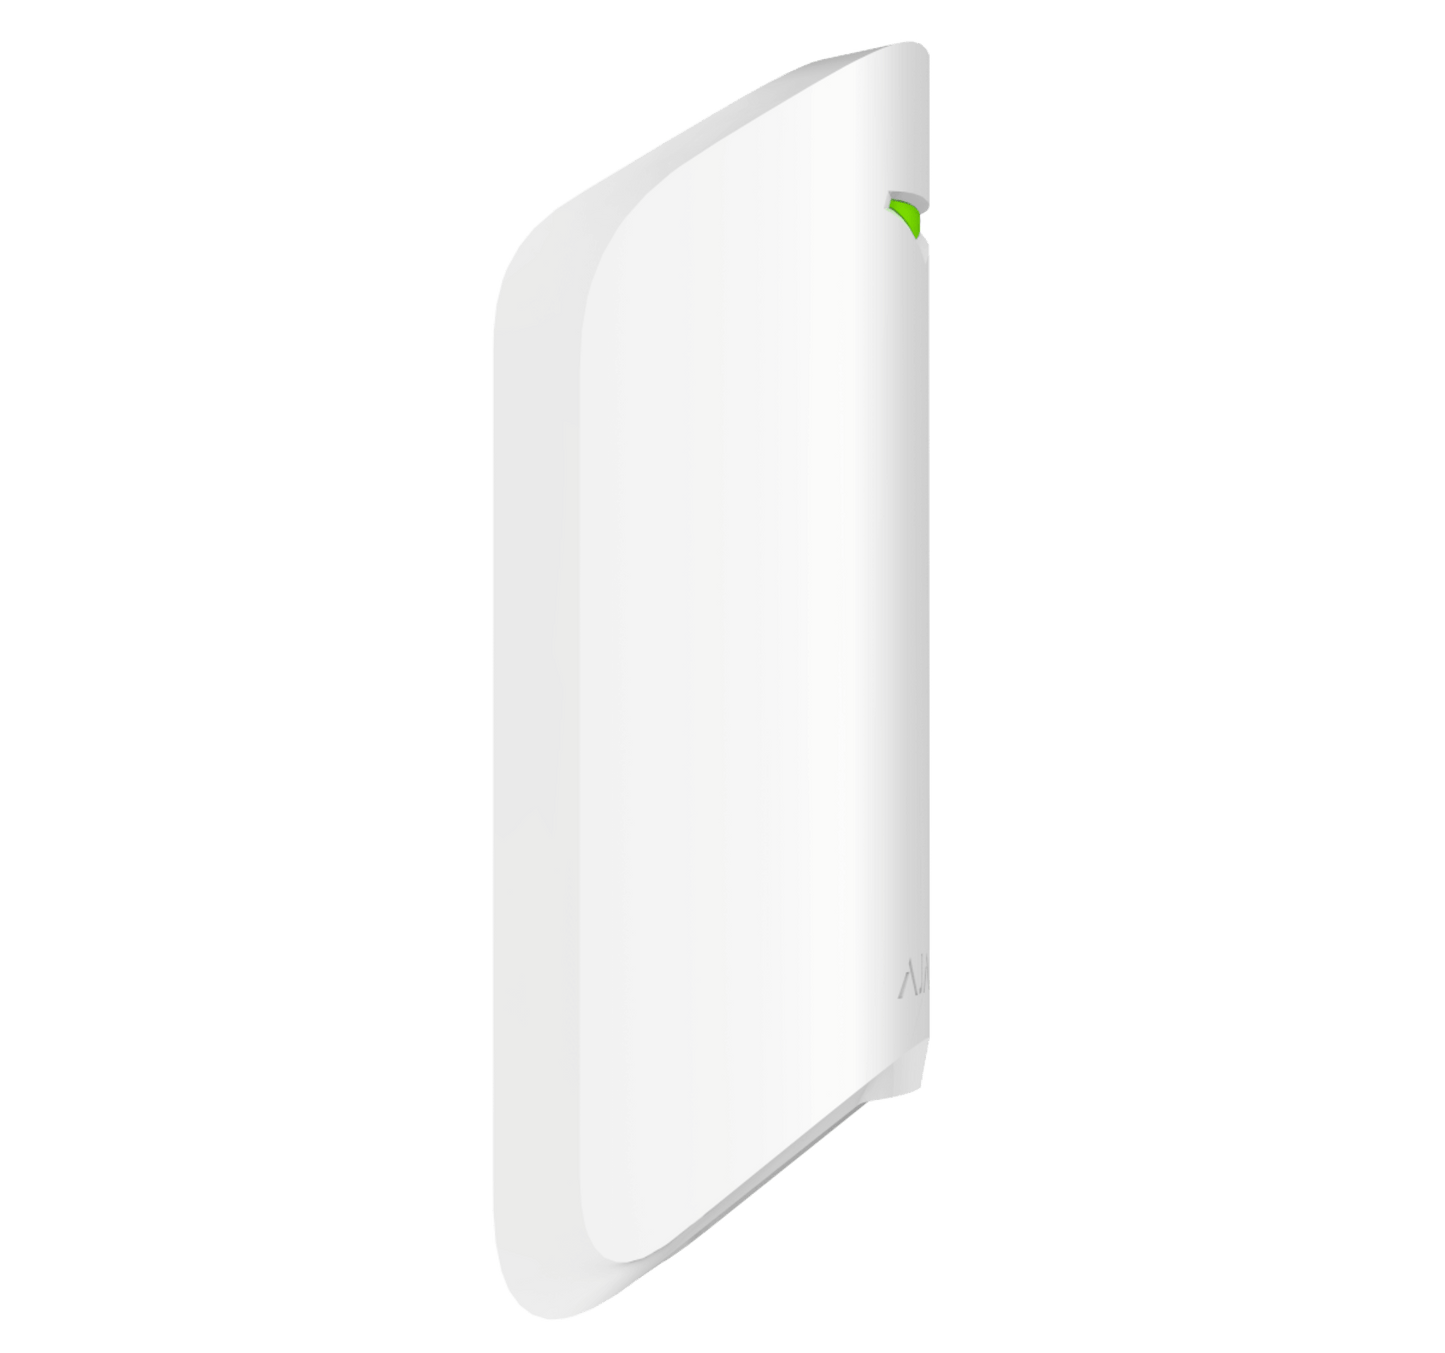 White Ajax MotionProtect Curtain detector a wireless motion detector for business and home security,  134 × 44 × 34 mm in size , 118grams in weight, Side view of device